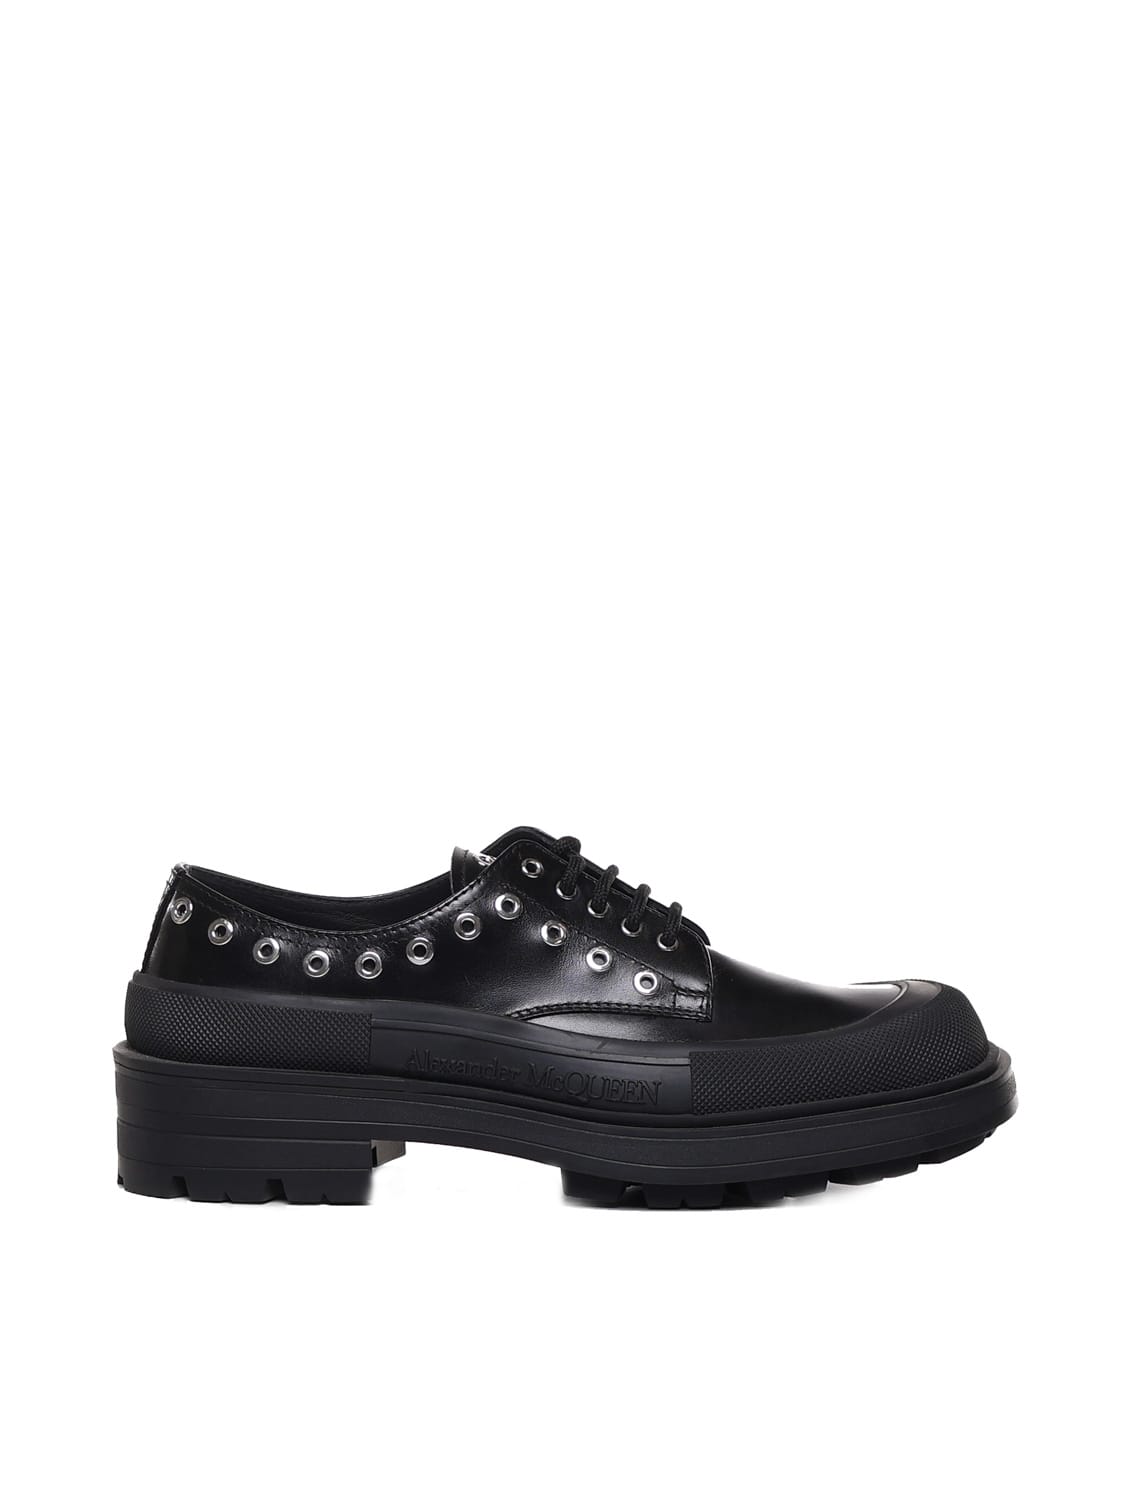 ALEXANDER MCQUEEN DERBY SHOES WITH THICK SOLE